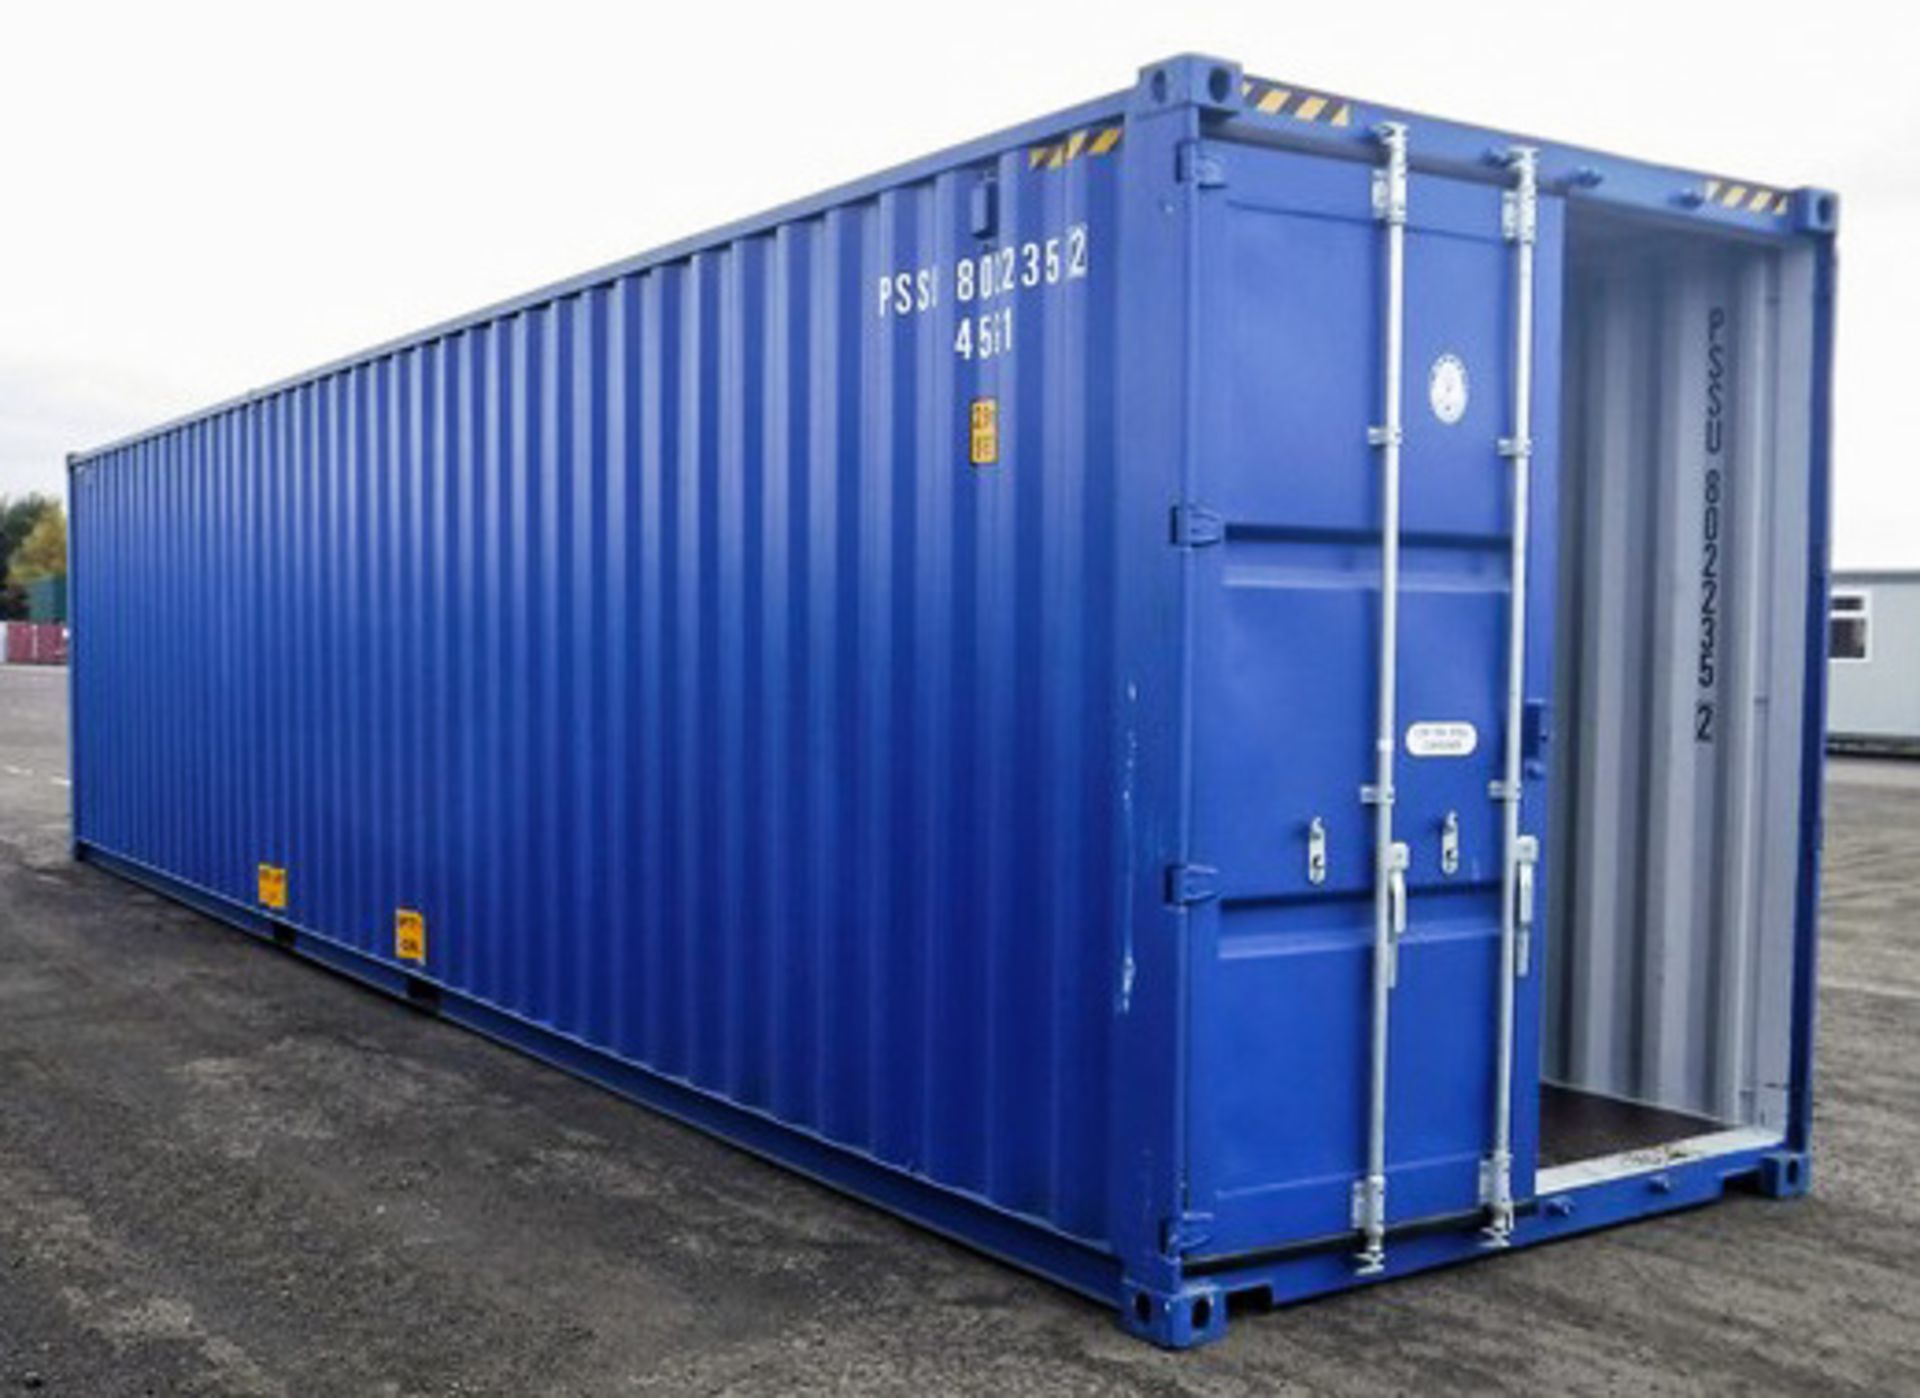 NEW ONE TRIP HIGH CUBE 40' X 8' X 9'6" SHIPPING CONTAINER, C/W FORK POCKETS, LIFTING POINTS & LOCK B - Image 2 of 9